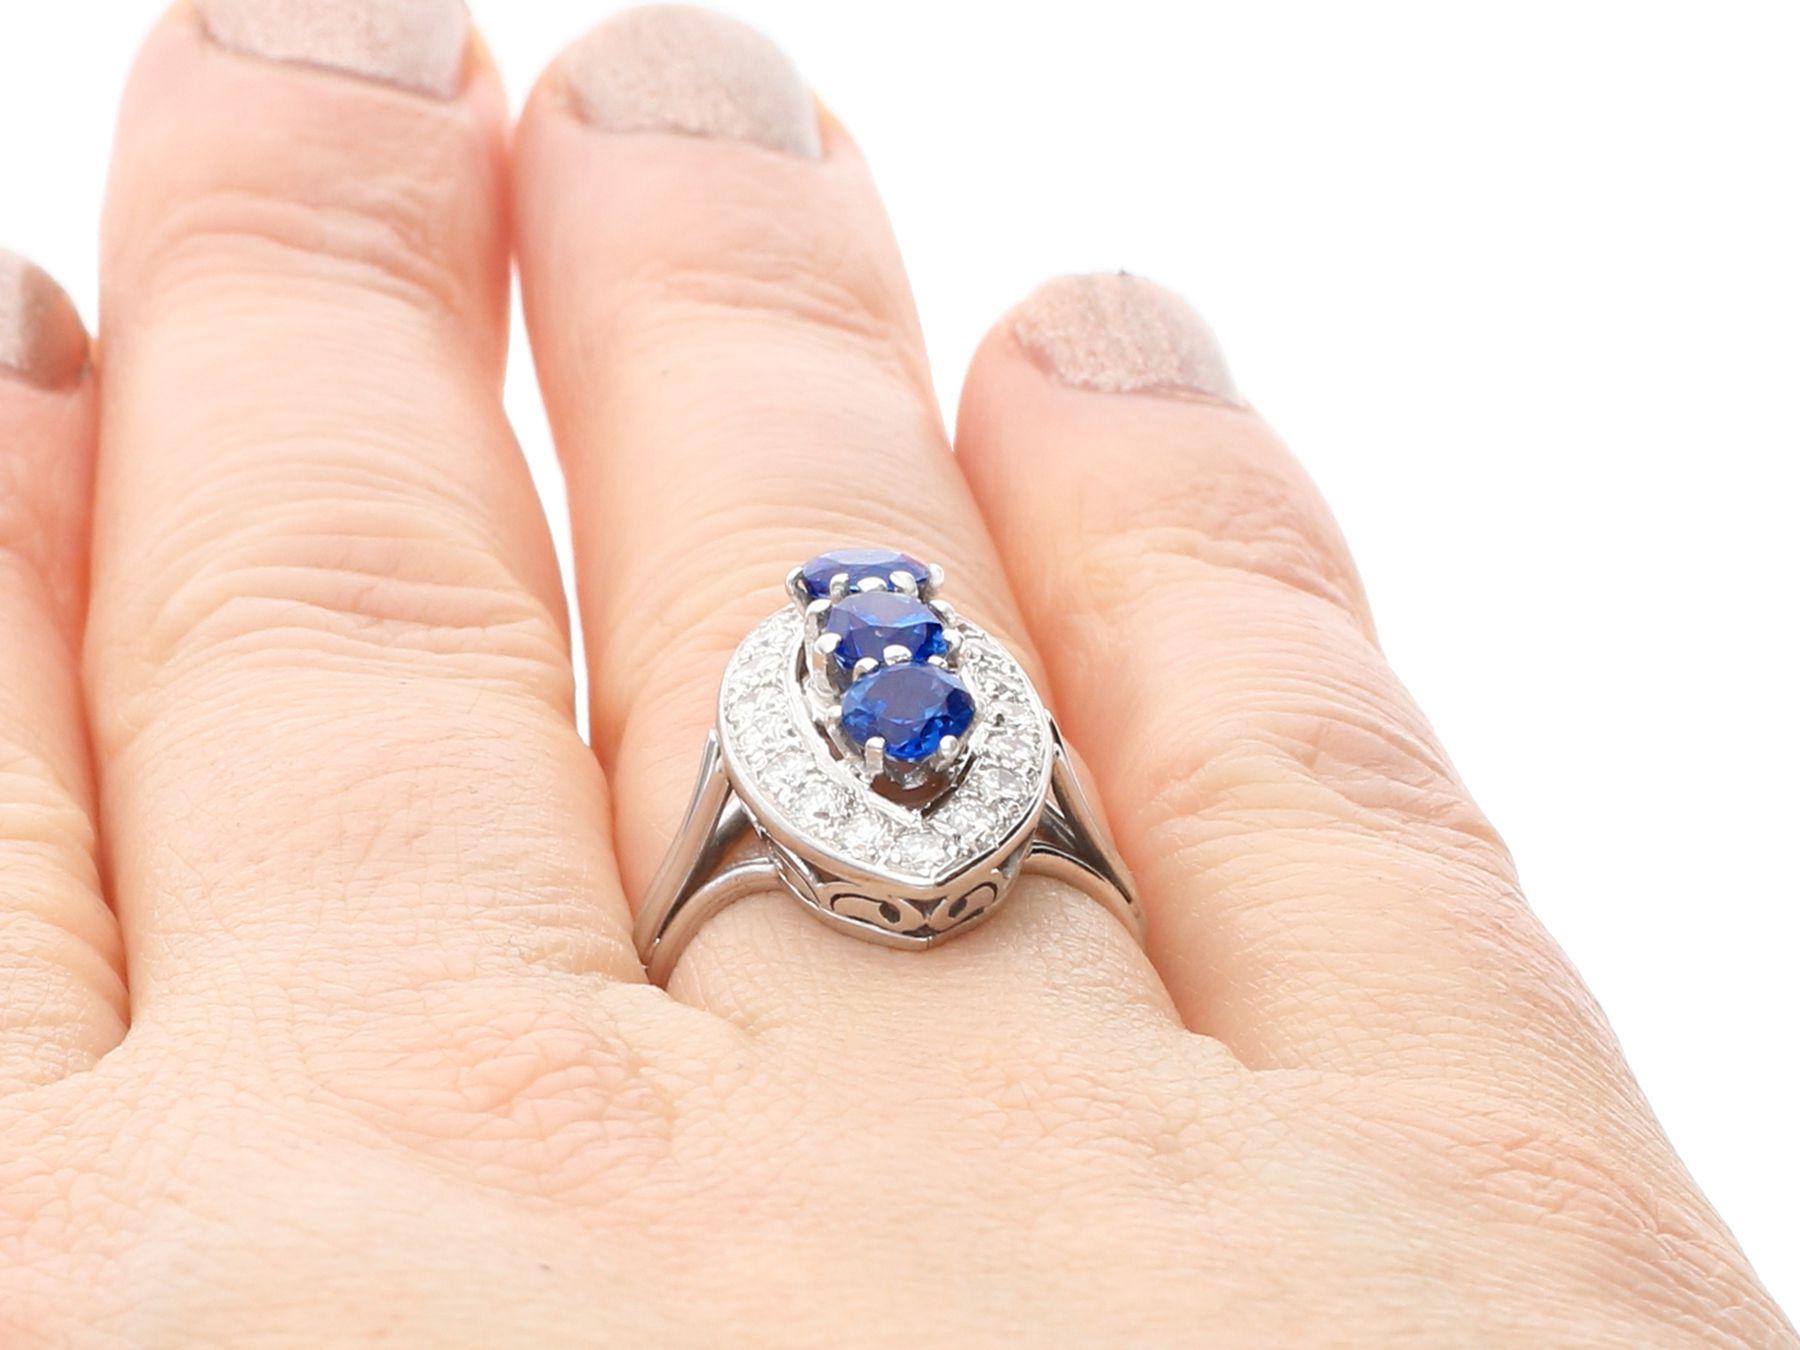 Vintage French 1.60 Carat Sapphire & 1.05 Carat Diamond White Gold Cluster Ring For Sale 3